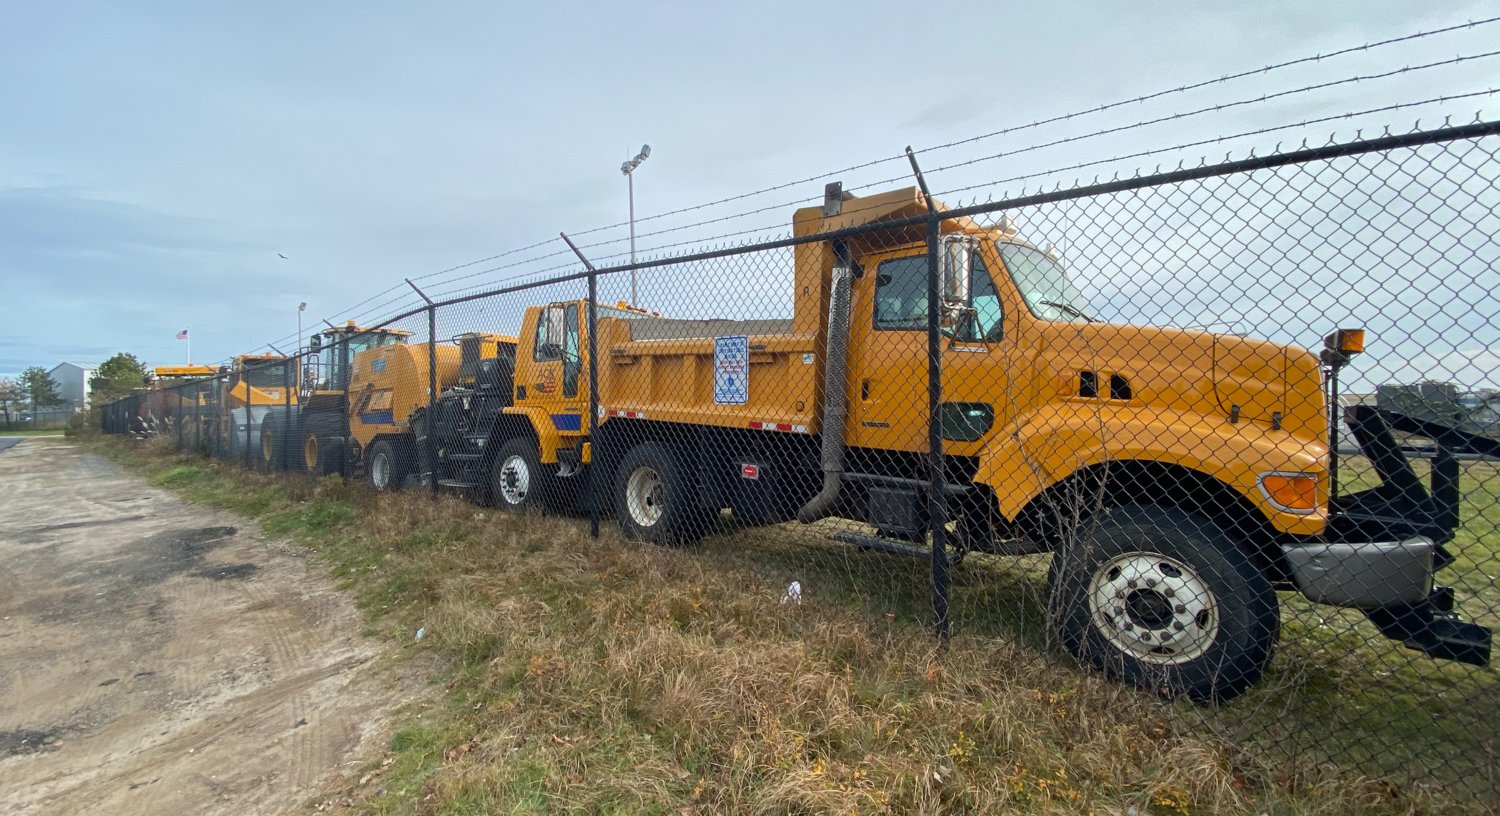 Nantucket Memorial Airport heavy equipment lines the permiter fence Sunday morning.